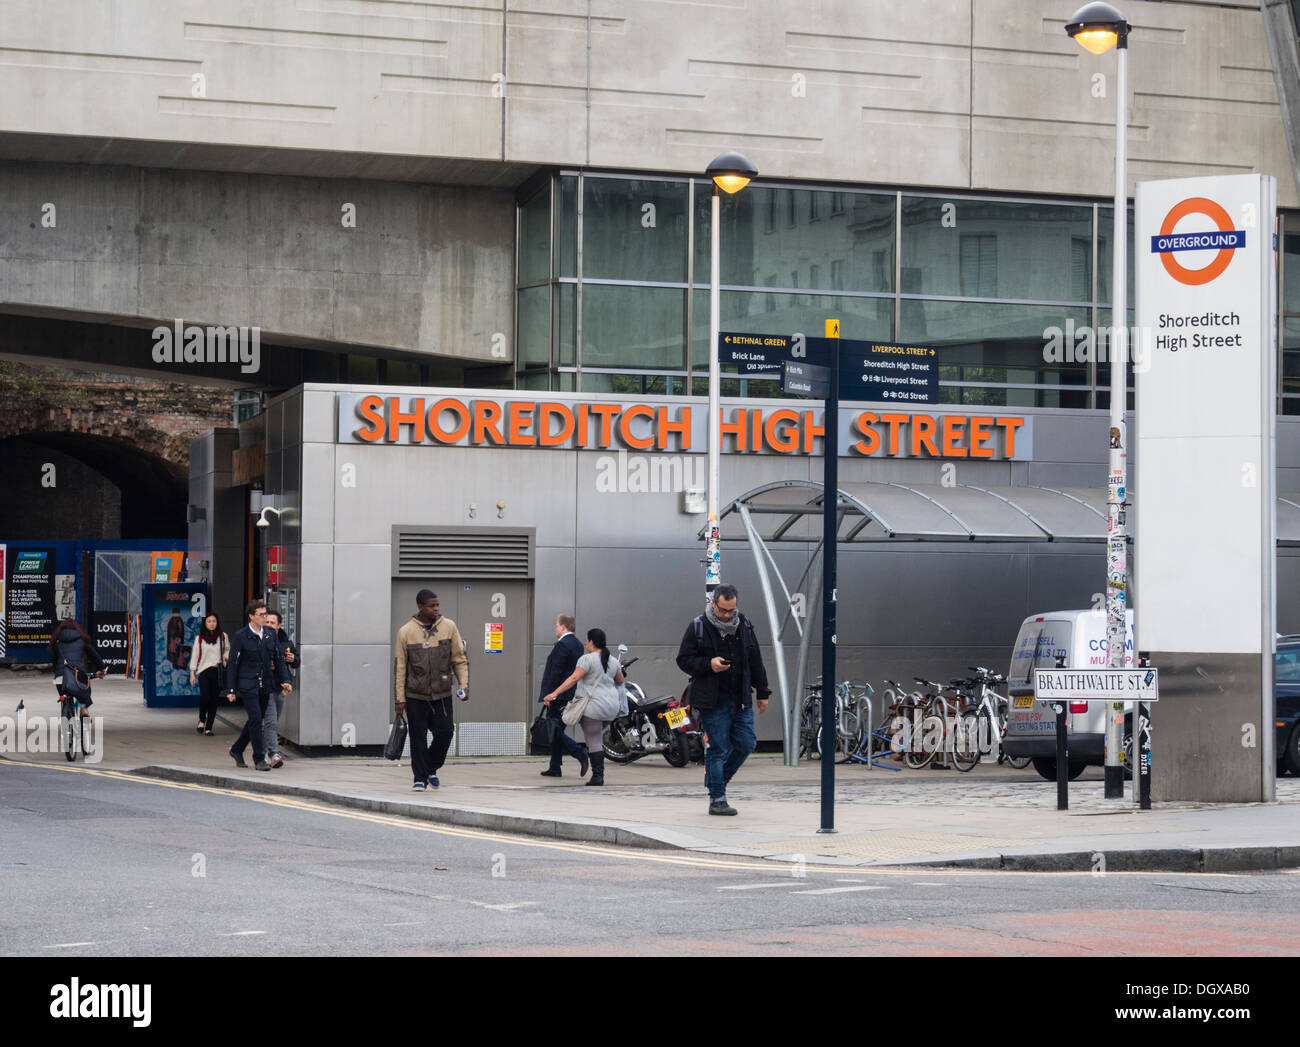 Shoreditch High Street Station in east London Stock Photo